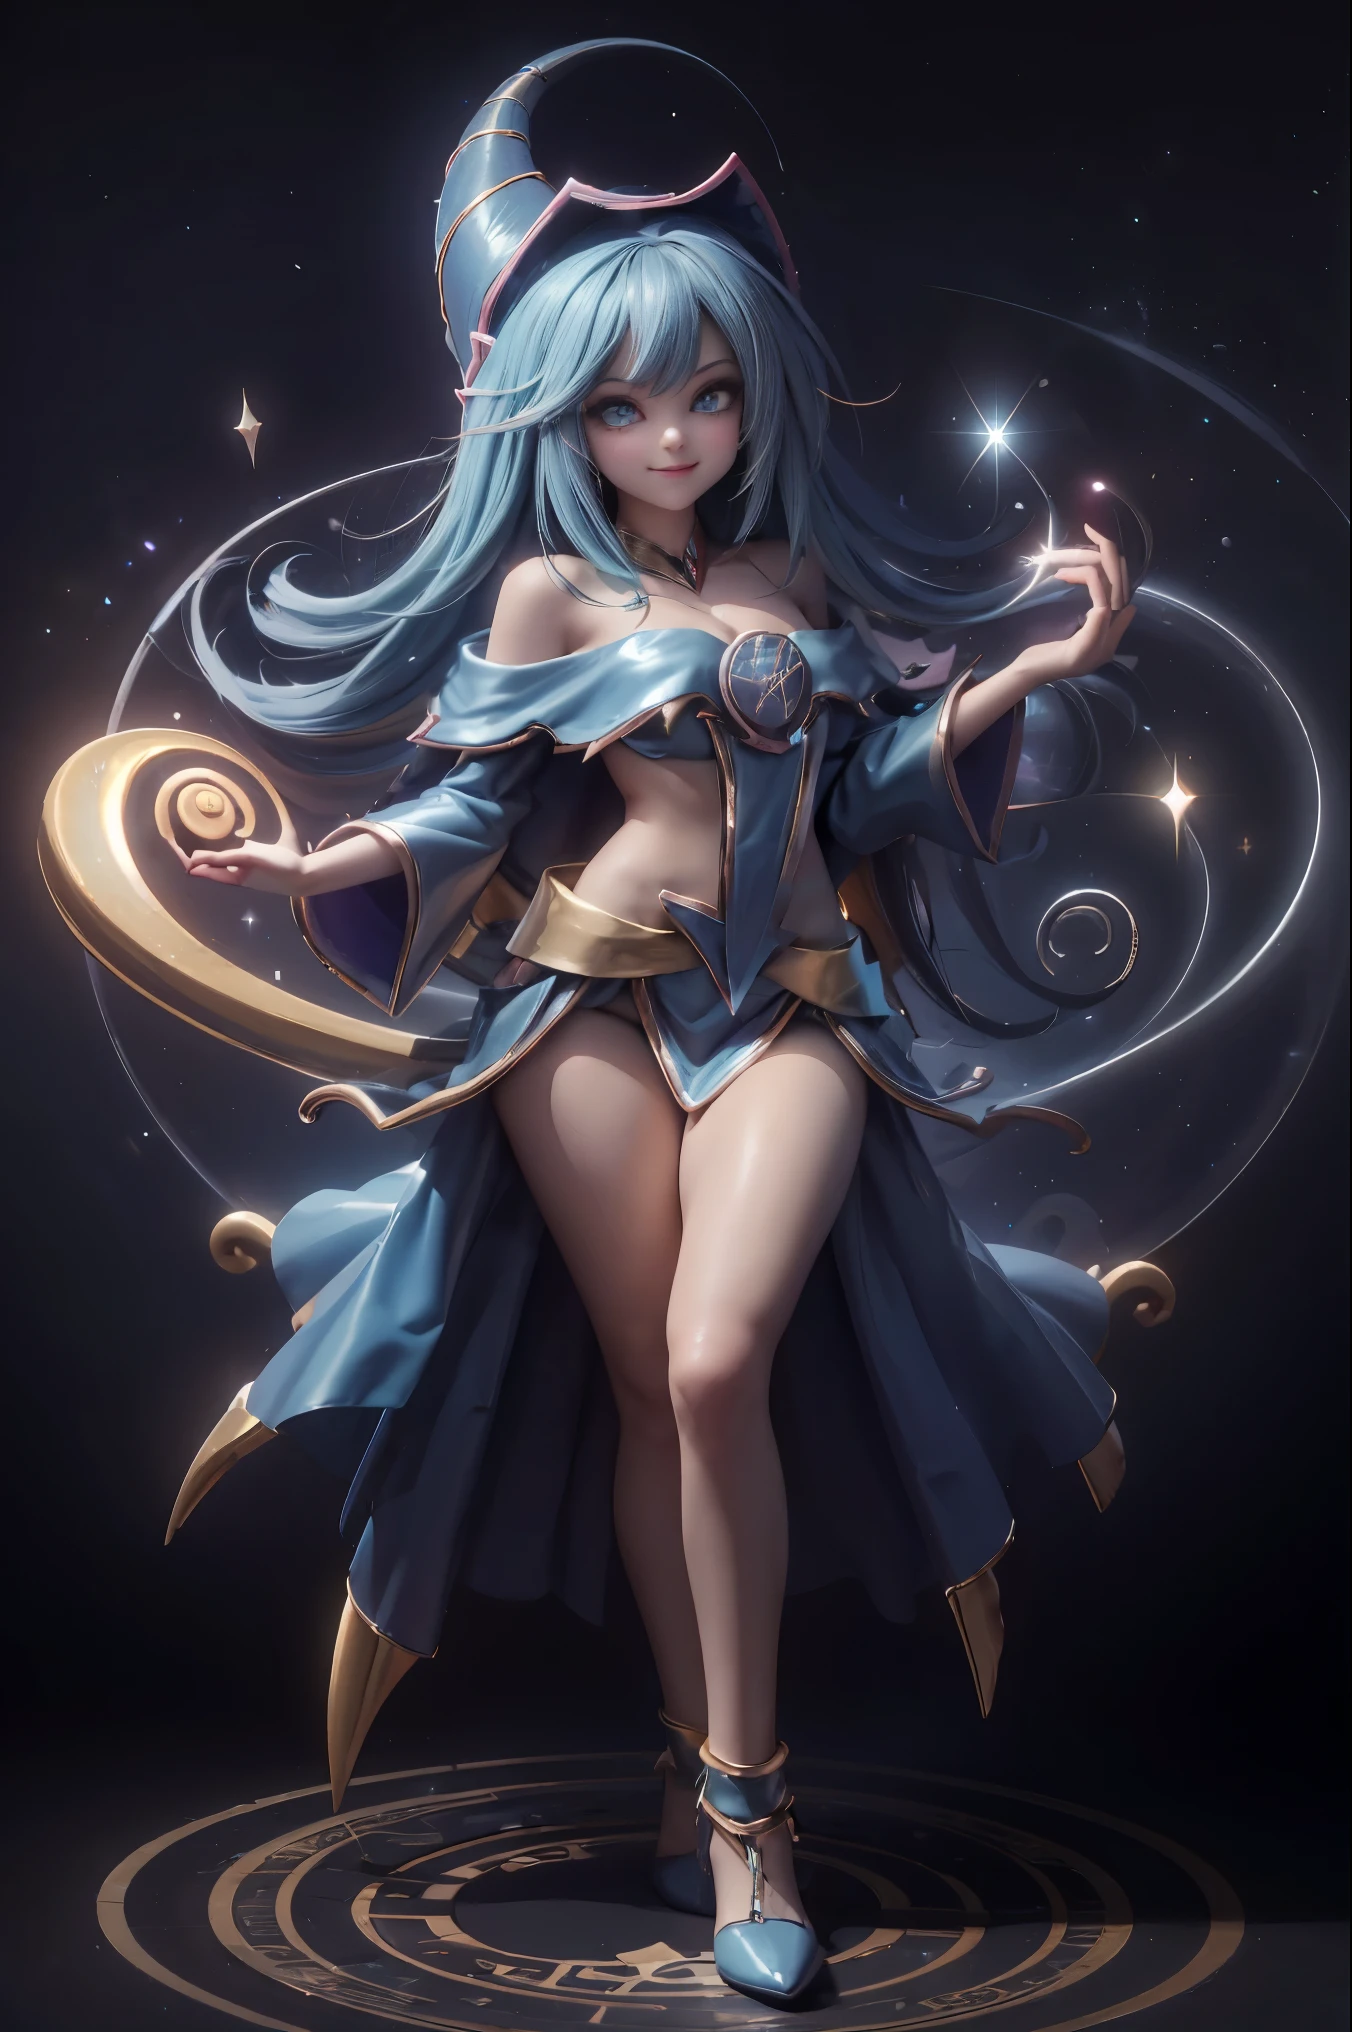 Dark magician gils in the air, she comes out of a magic circle of heart. Magic hearts background. smile on his lips. blue eyes. Golden hair. pose sensual. Levitating on one foot. has heels. Wear blue and gold heels 